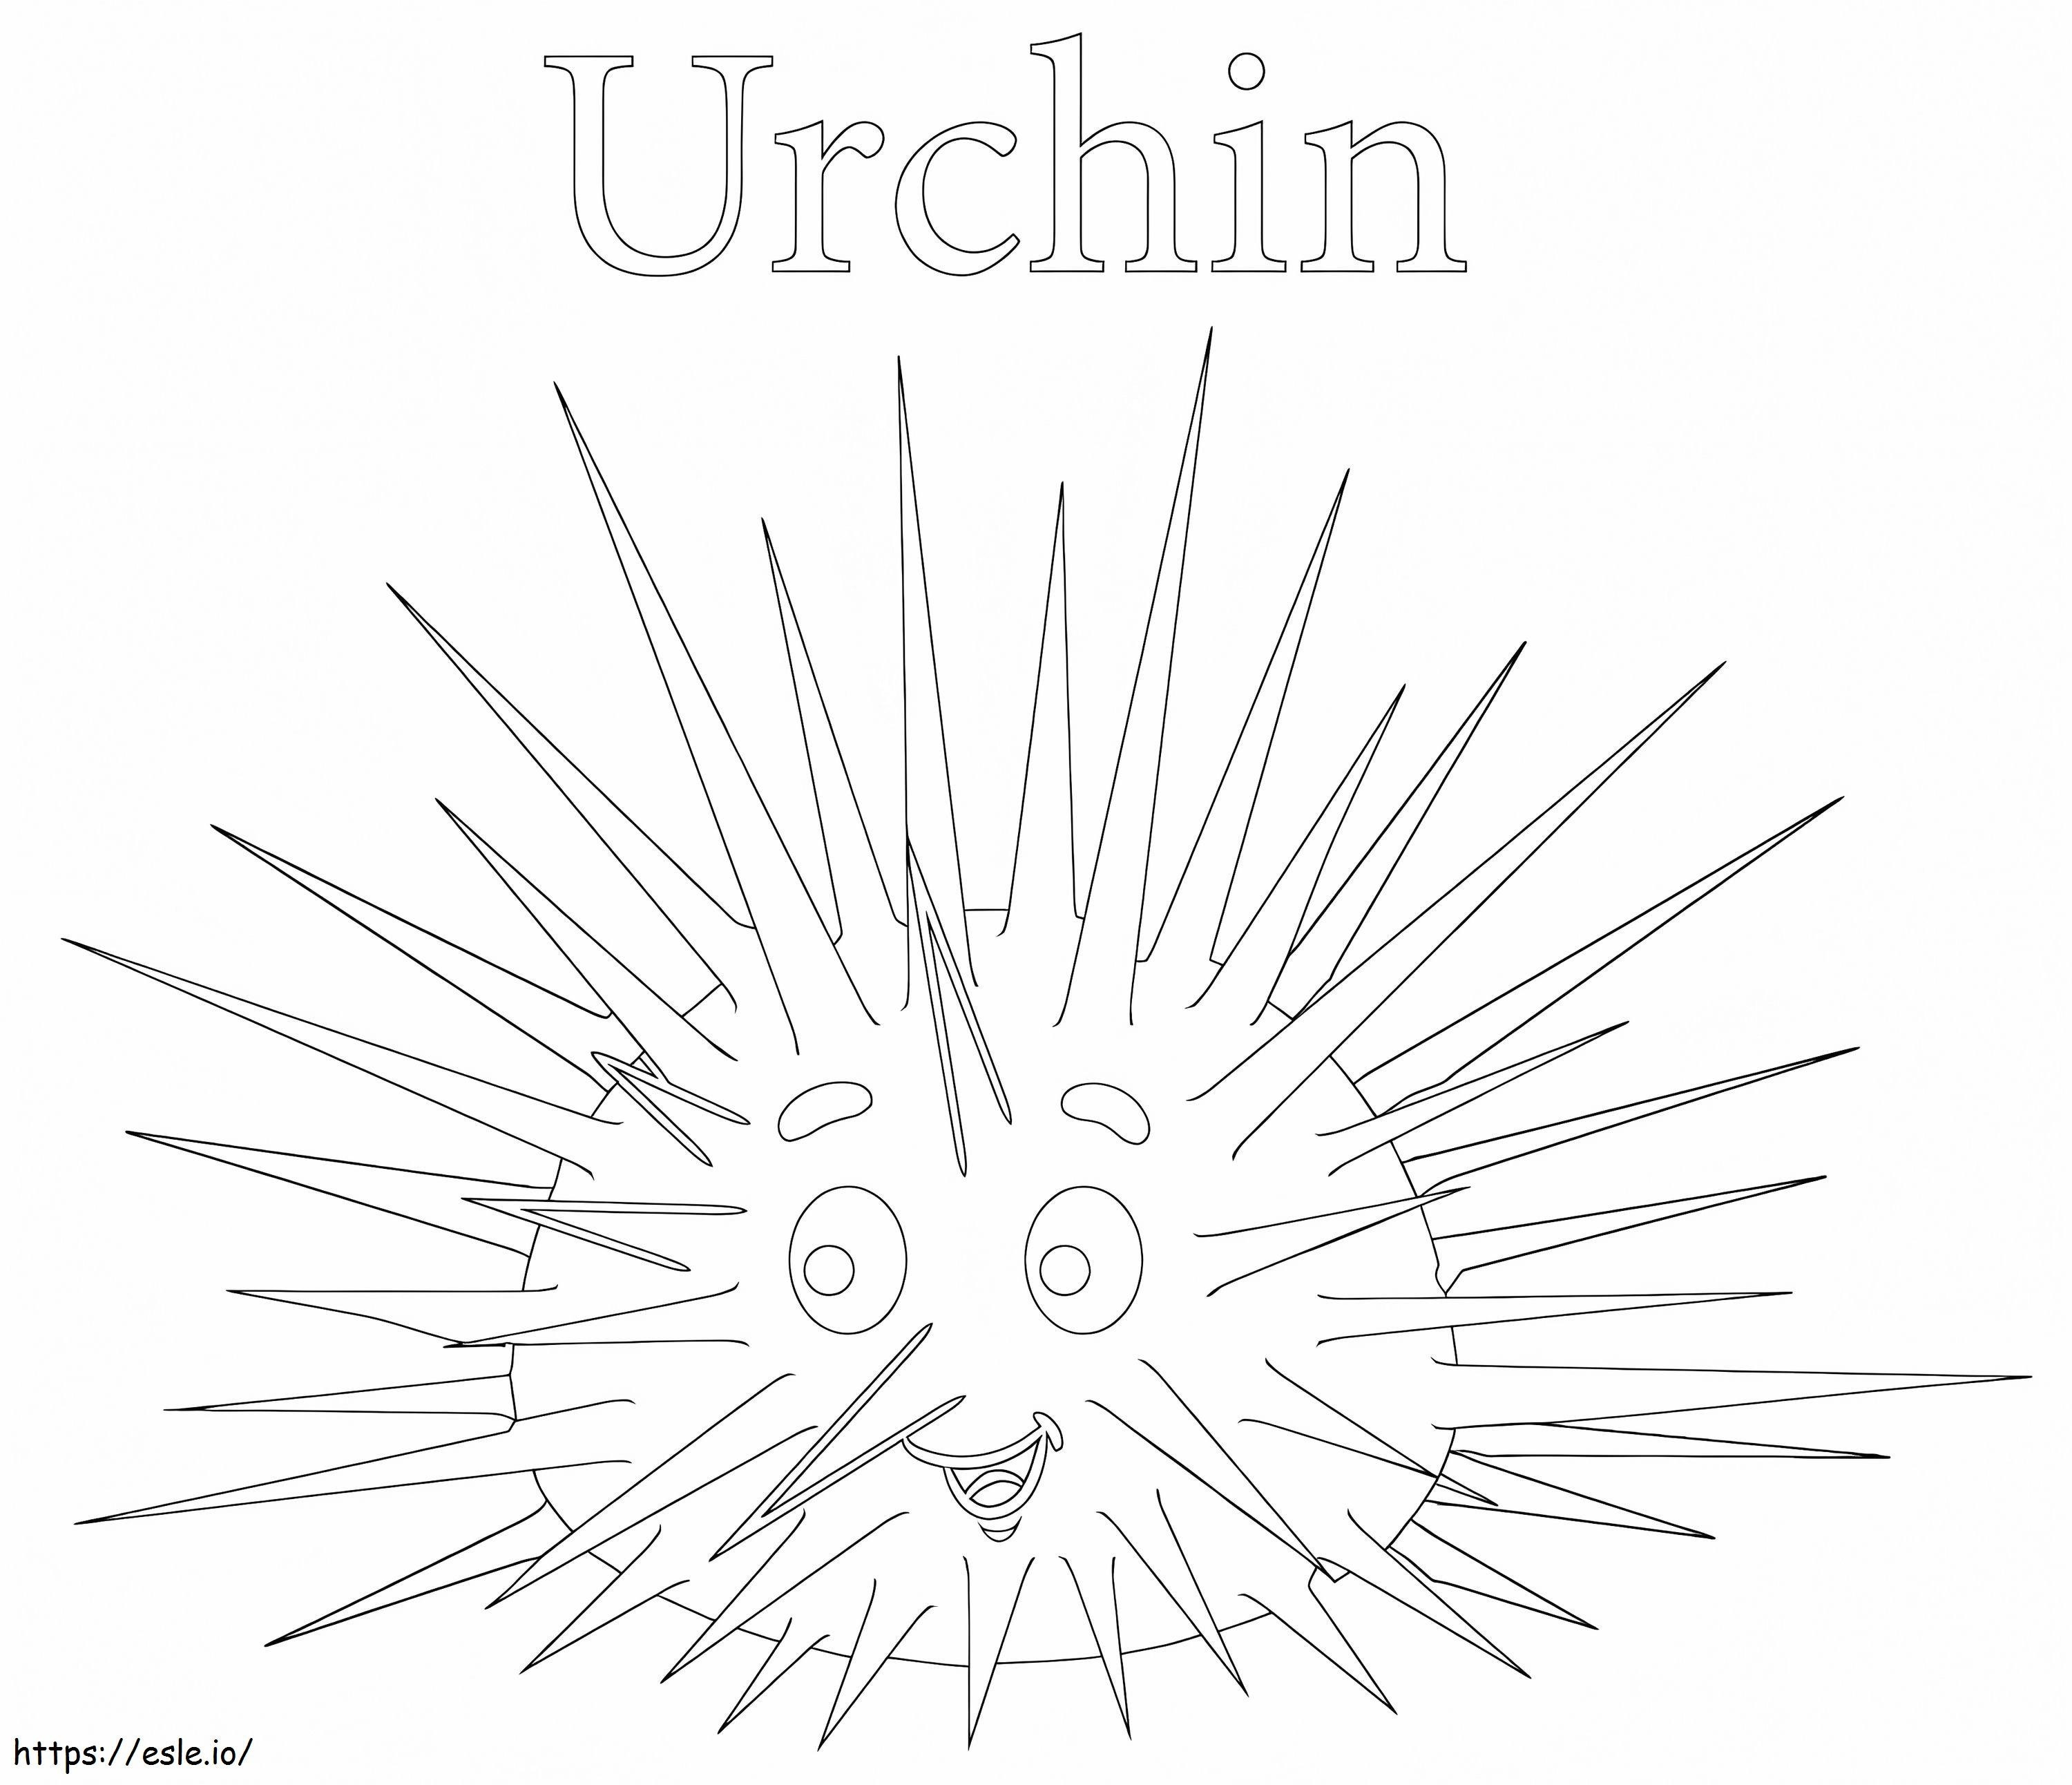 Cartoon Urchin coloring page